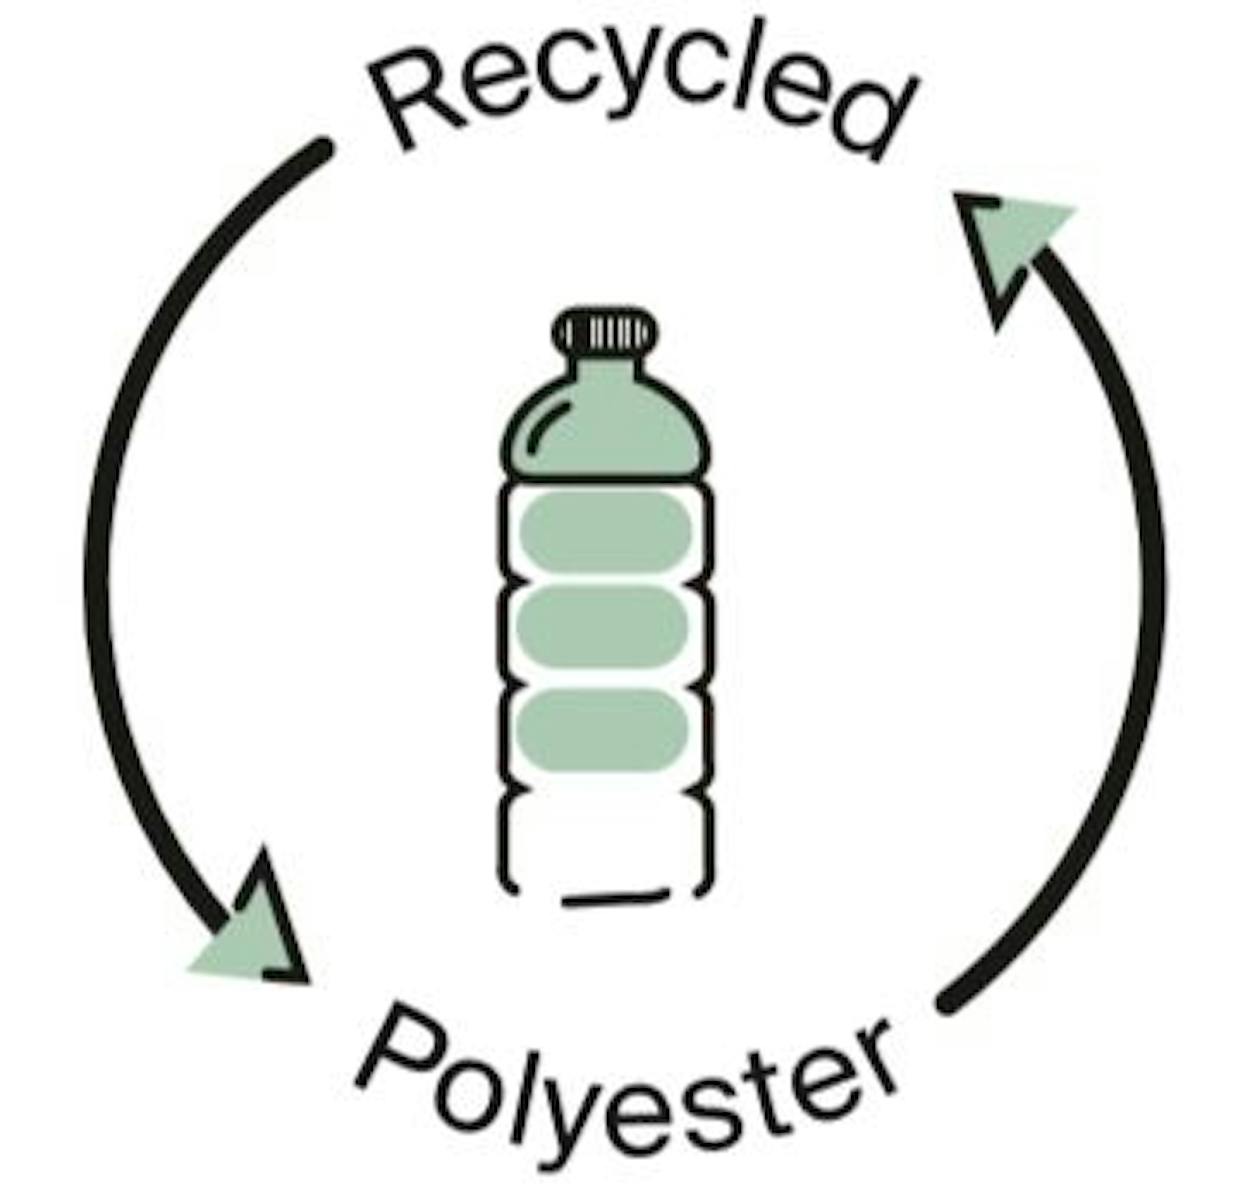 Recycled Polyester certification